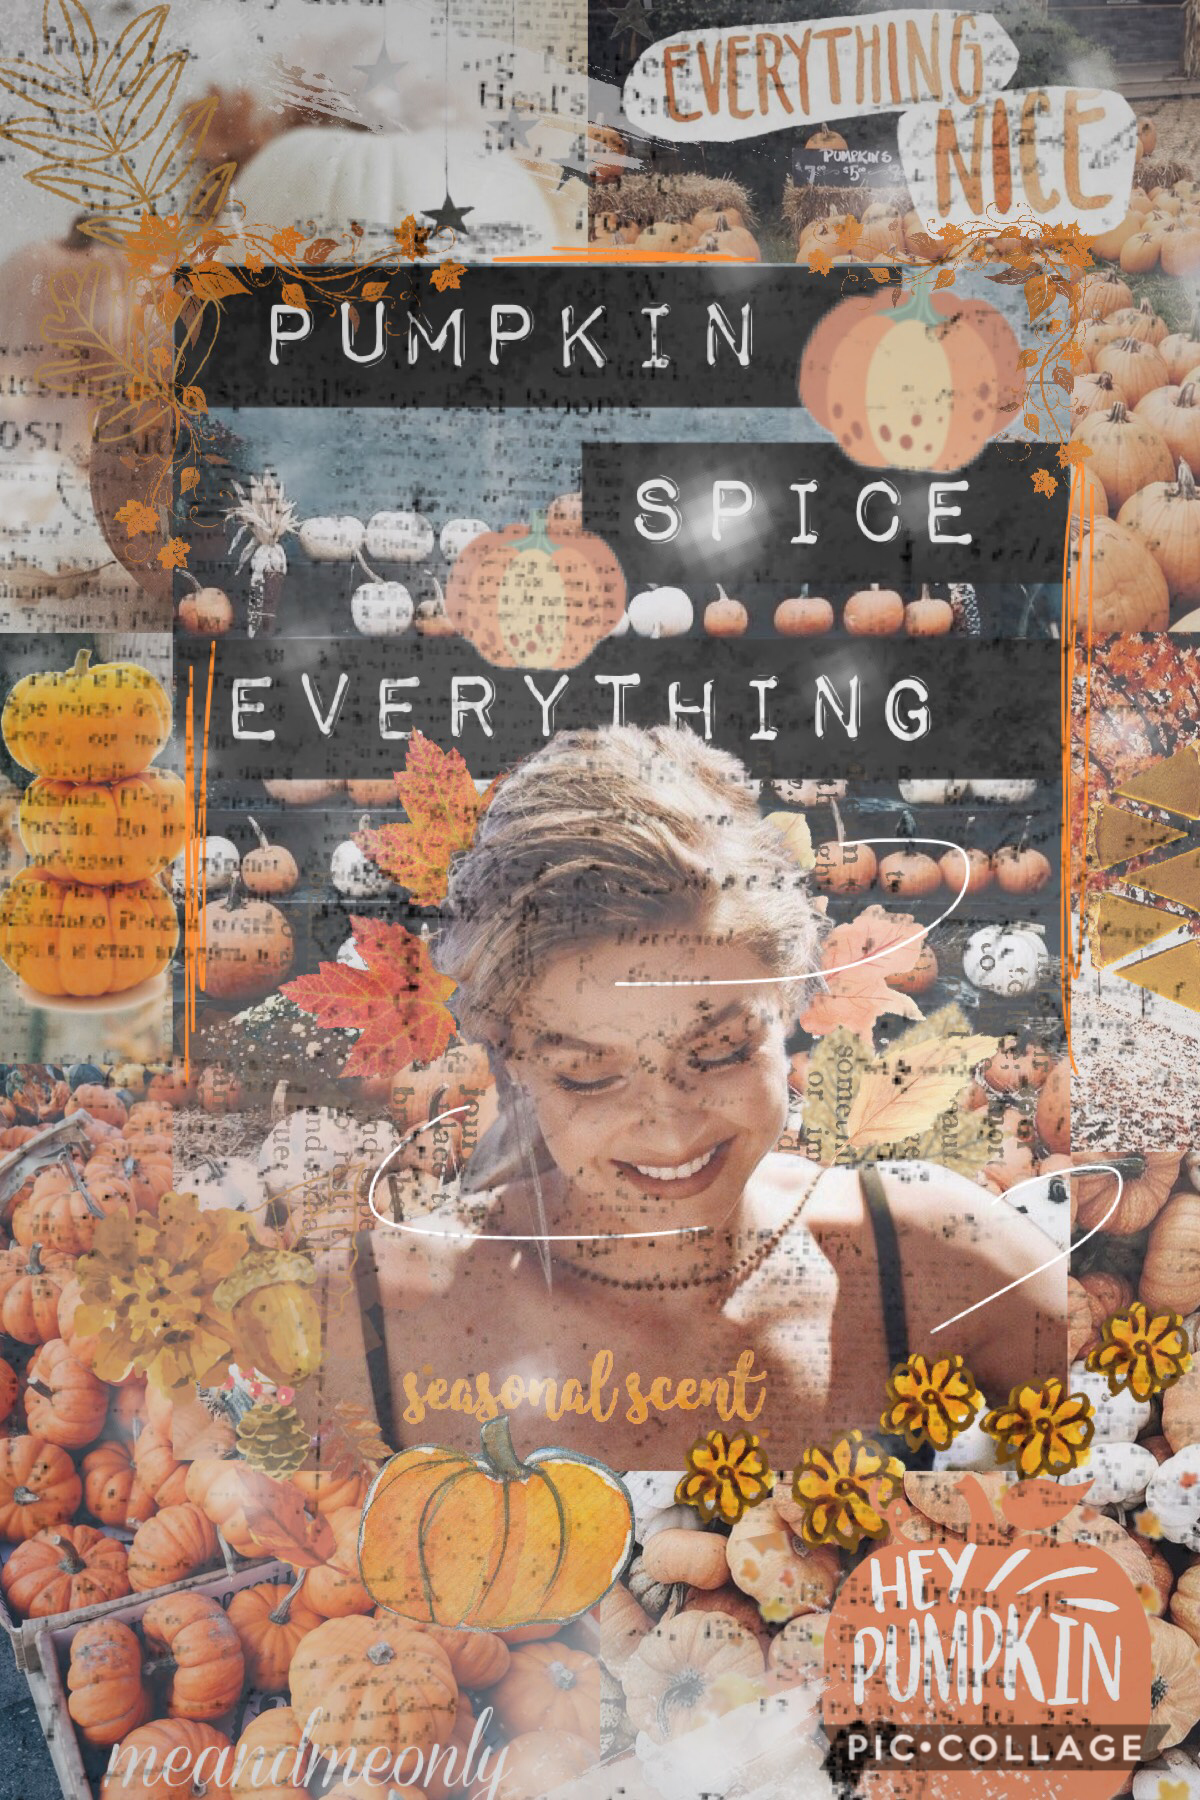 y’all this is really autumn/fall themed! 🍂🍁 i loveee autumn and stepping on the crunchy leaves, (lol is it just me or is it sooo satisfying) haha. well this is my entry to simplicity_extras games 🎃 QOTD: night or day? AOTD: both! ☀️🌚